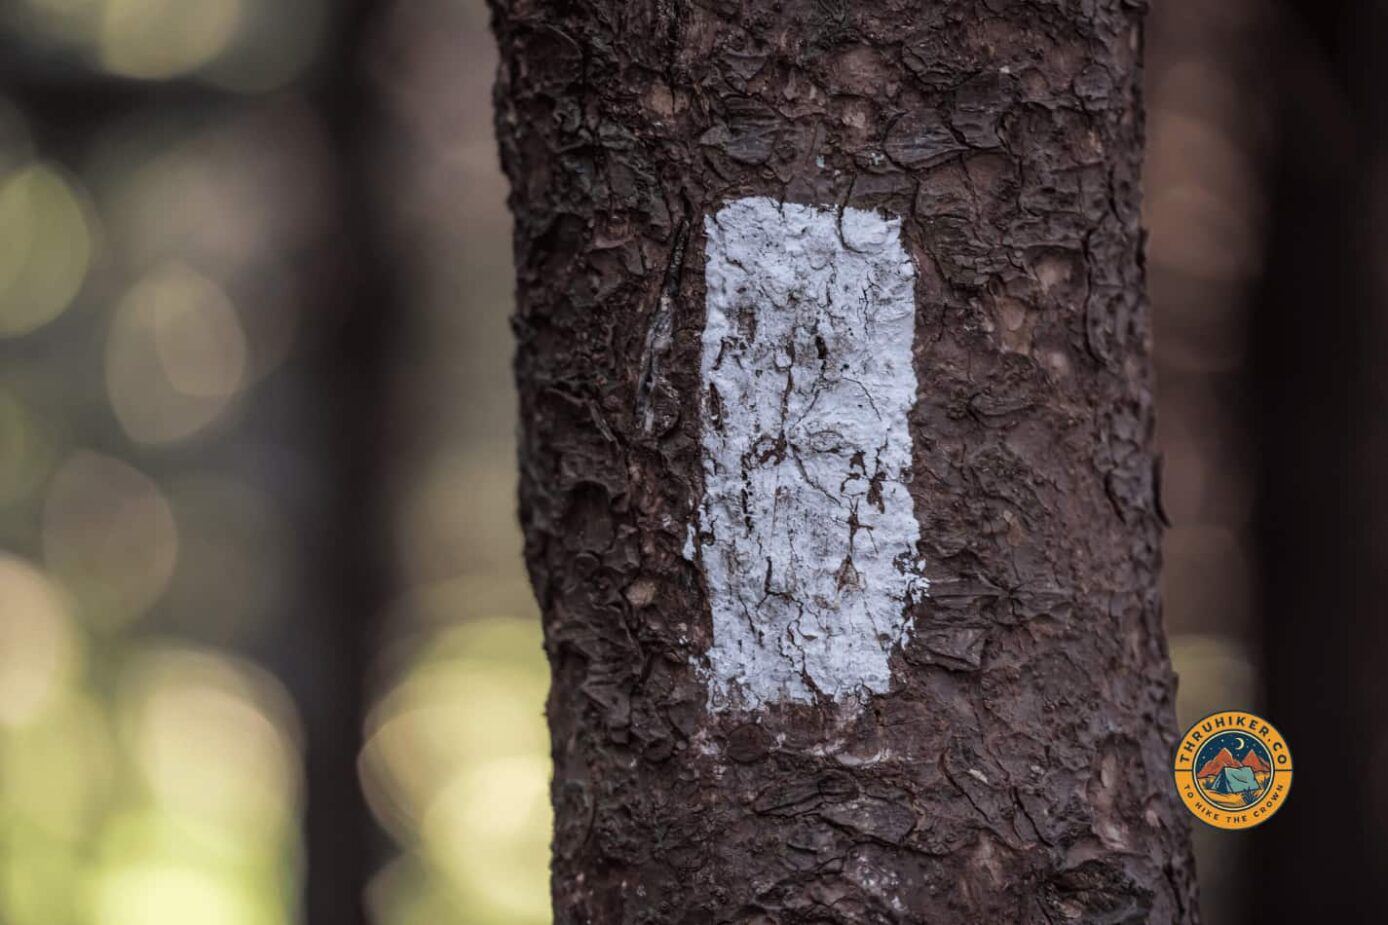 White blaze on a tree showing the path to follow for the Appalachian Trail